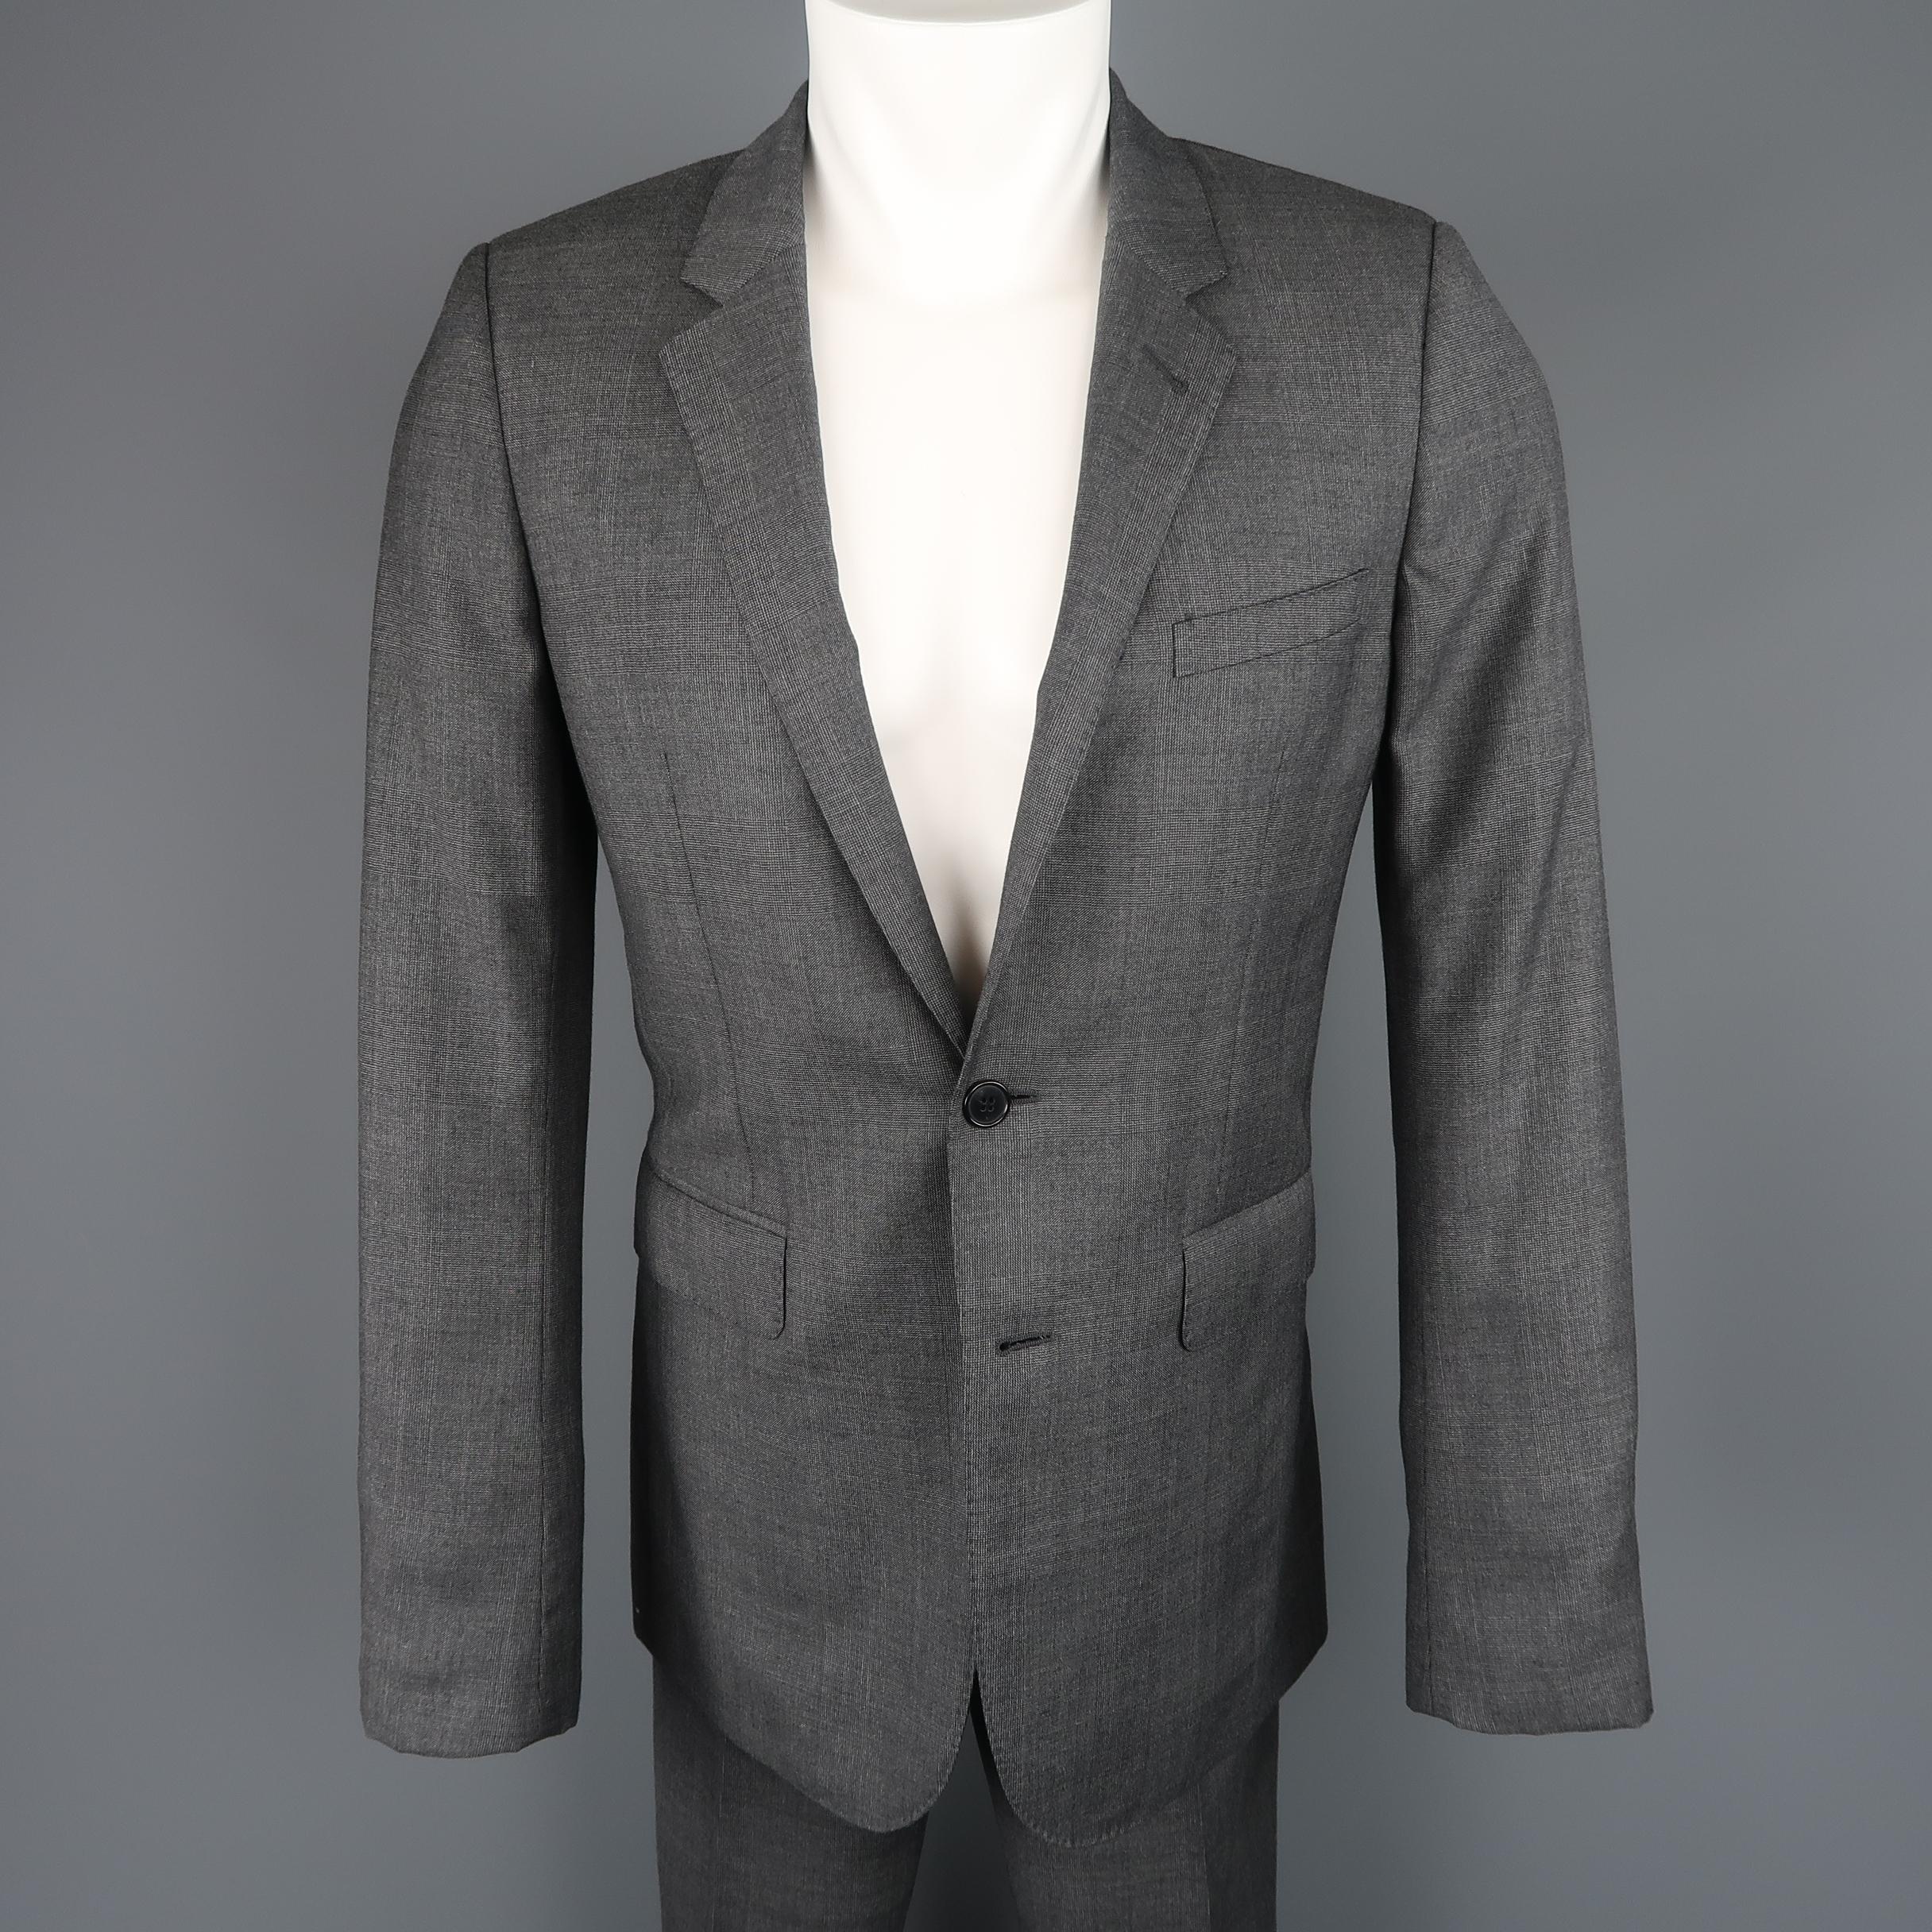 This SAINT LAURENT two piece slim fit suit comes in dark gray wool with a subtle plaid print and includes a single breasted, two button, notch lapel sport coat and matching flat front trousers. Made in Italy.
 
Excellent Pre-Owned Condition.
Marked: